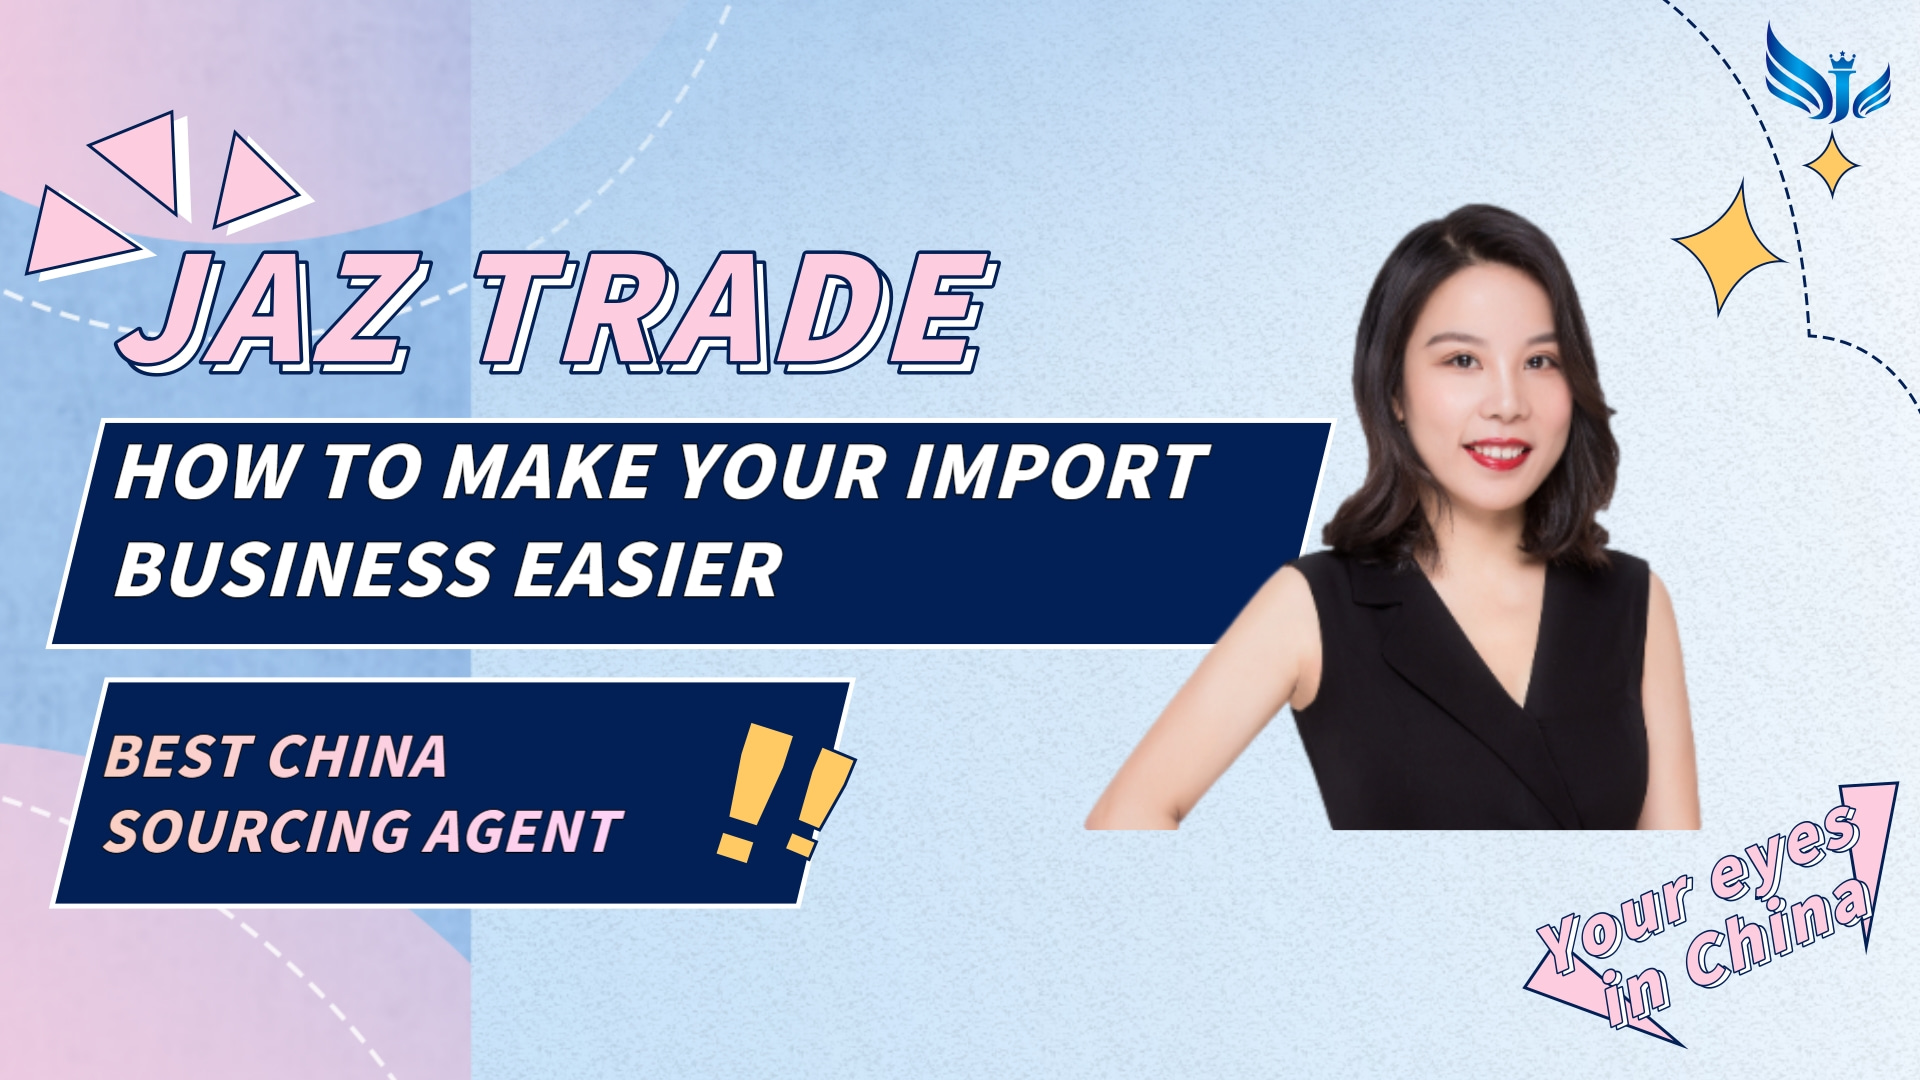 Best Sourcing&Buying Agent GuangZhou, China; Make your import business easier from China